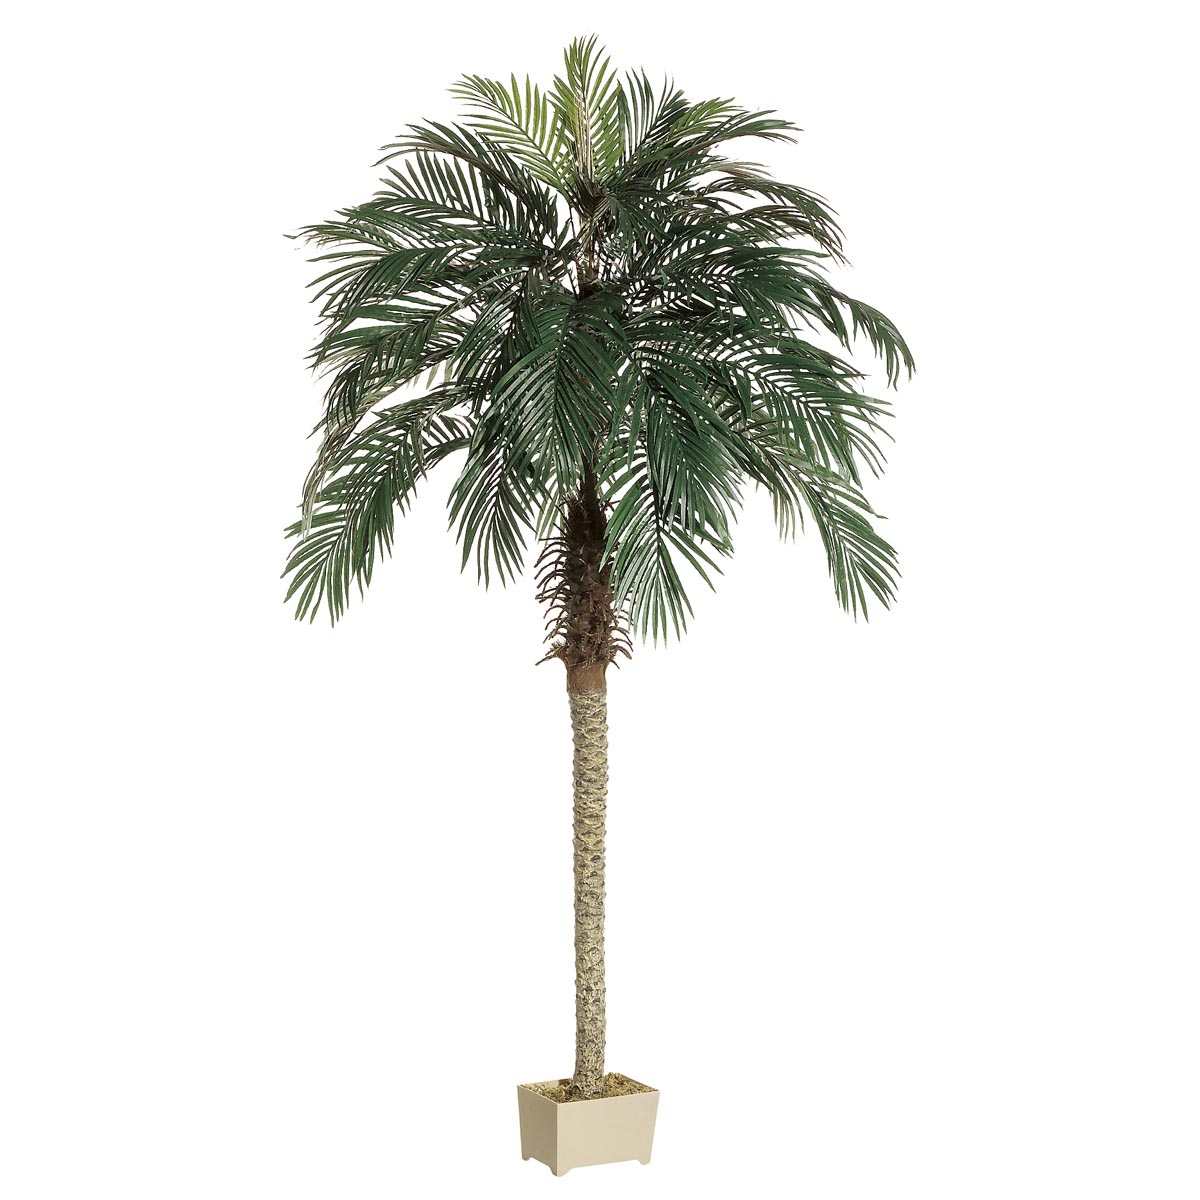 6.5 Foot Phoenix Palm Tree: Potted